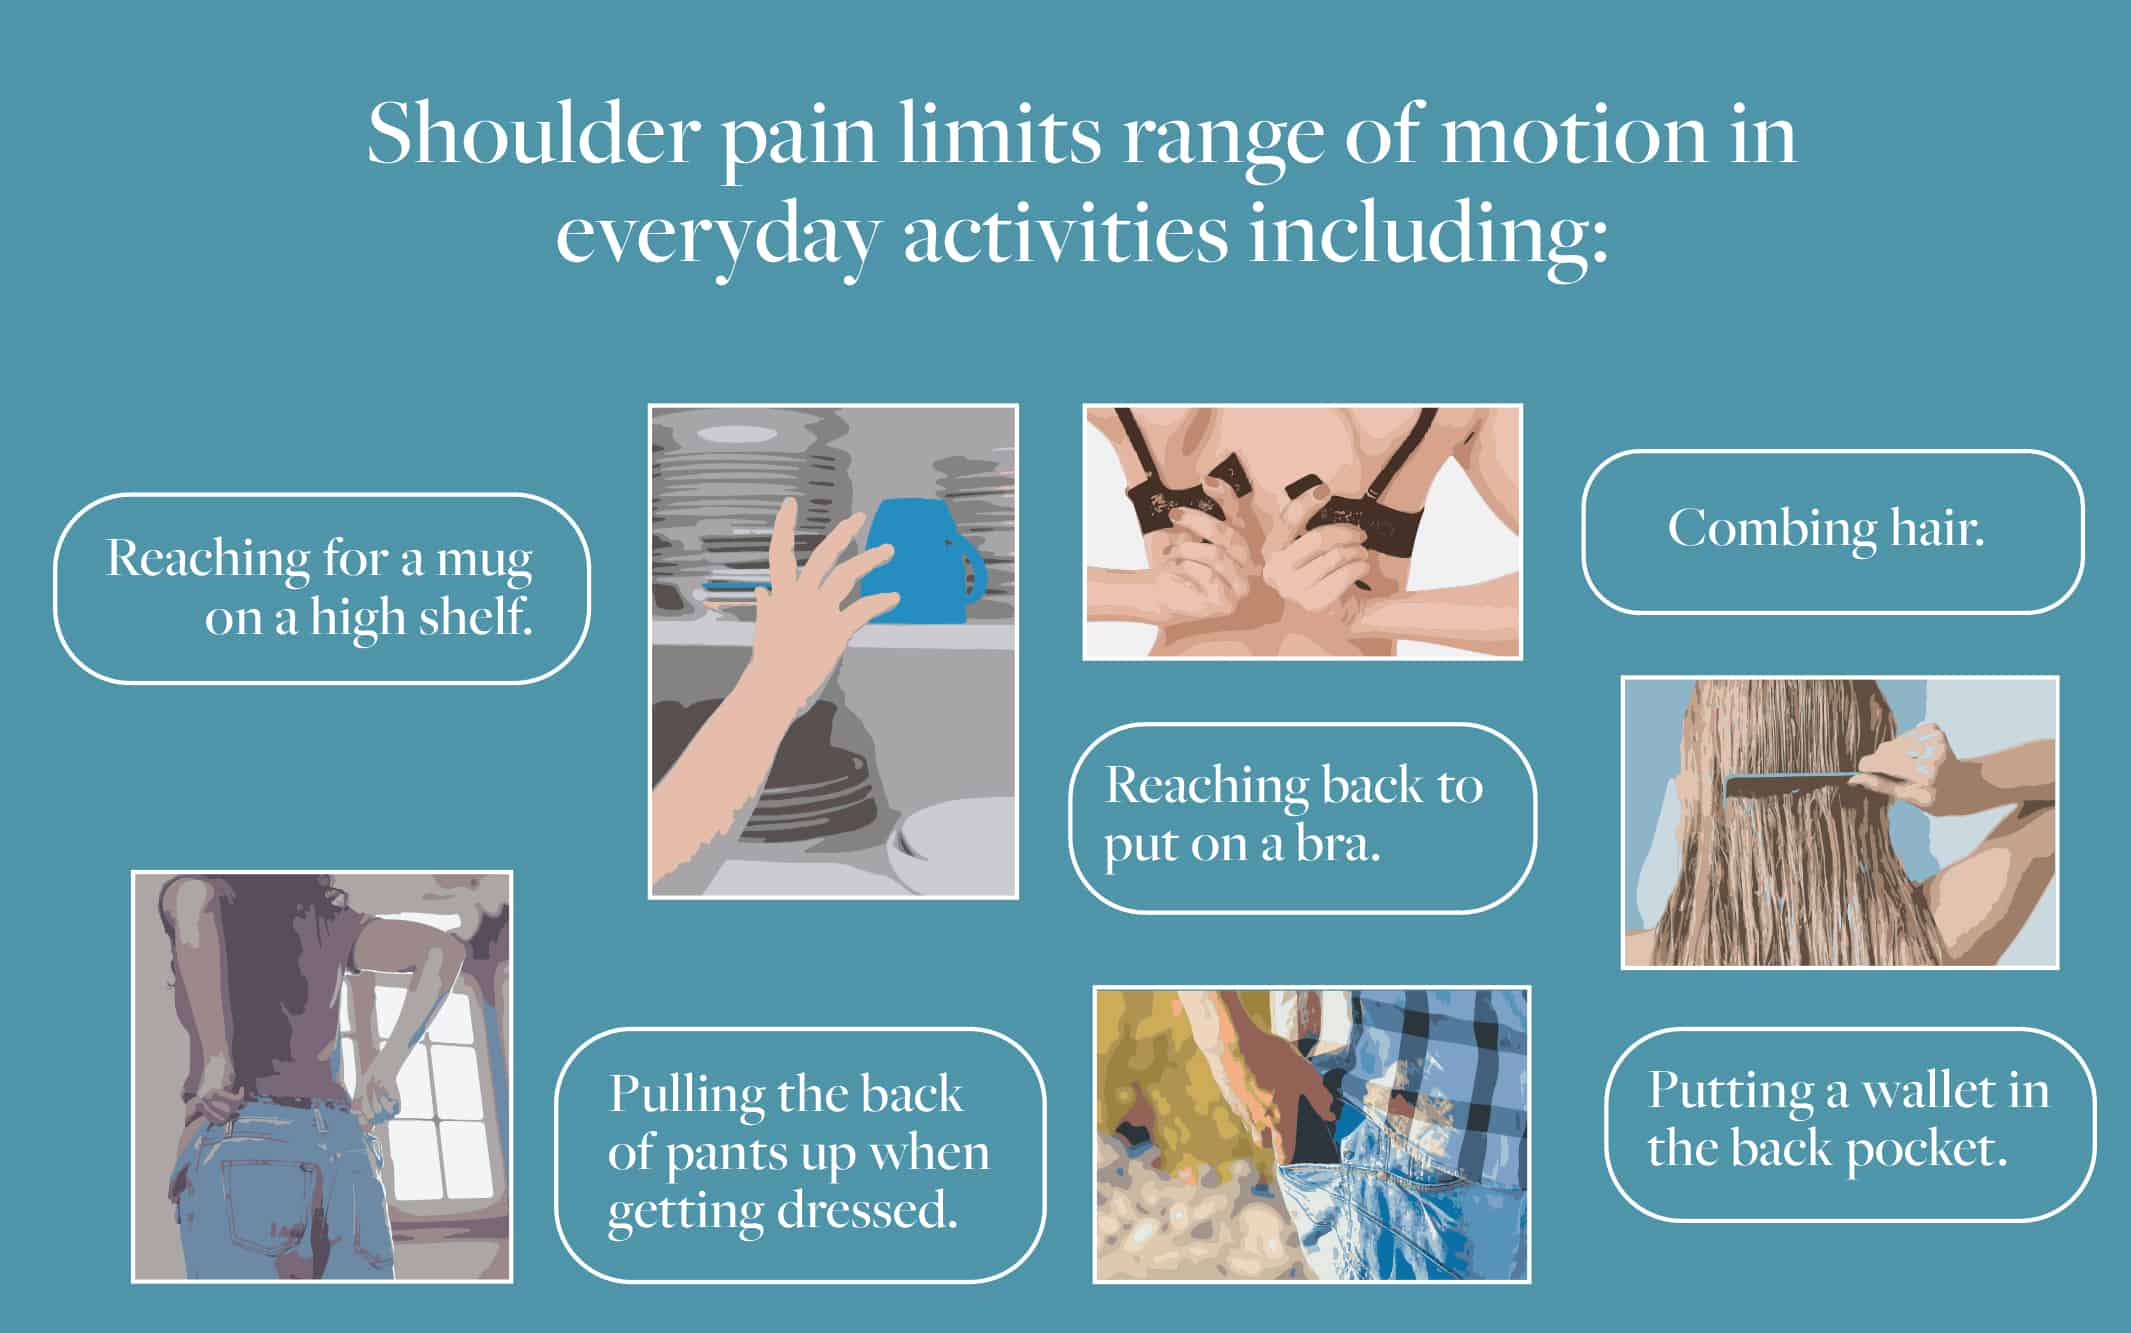 Range of motion limitations with shoulder pain graphic